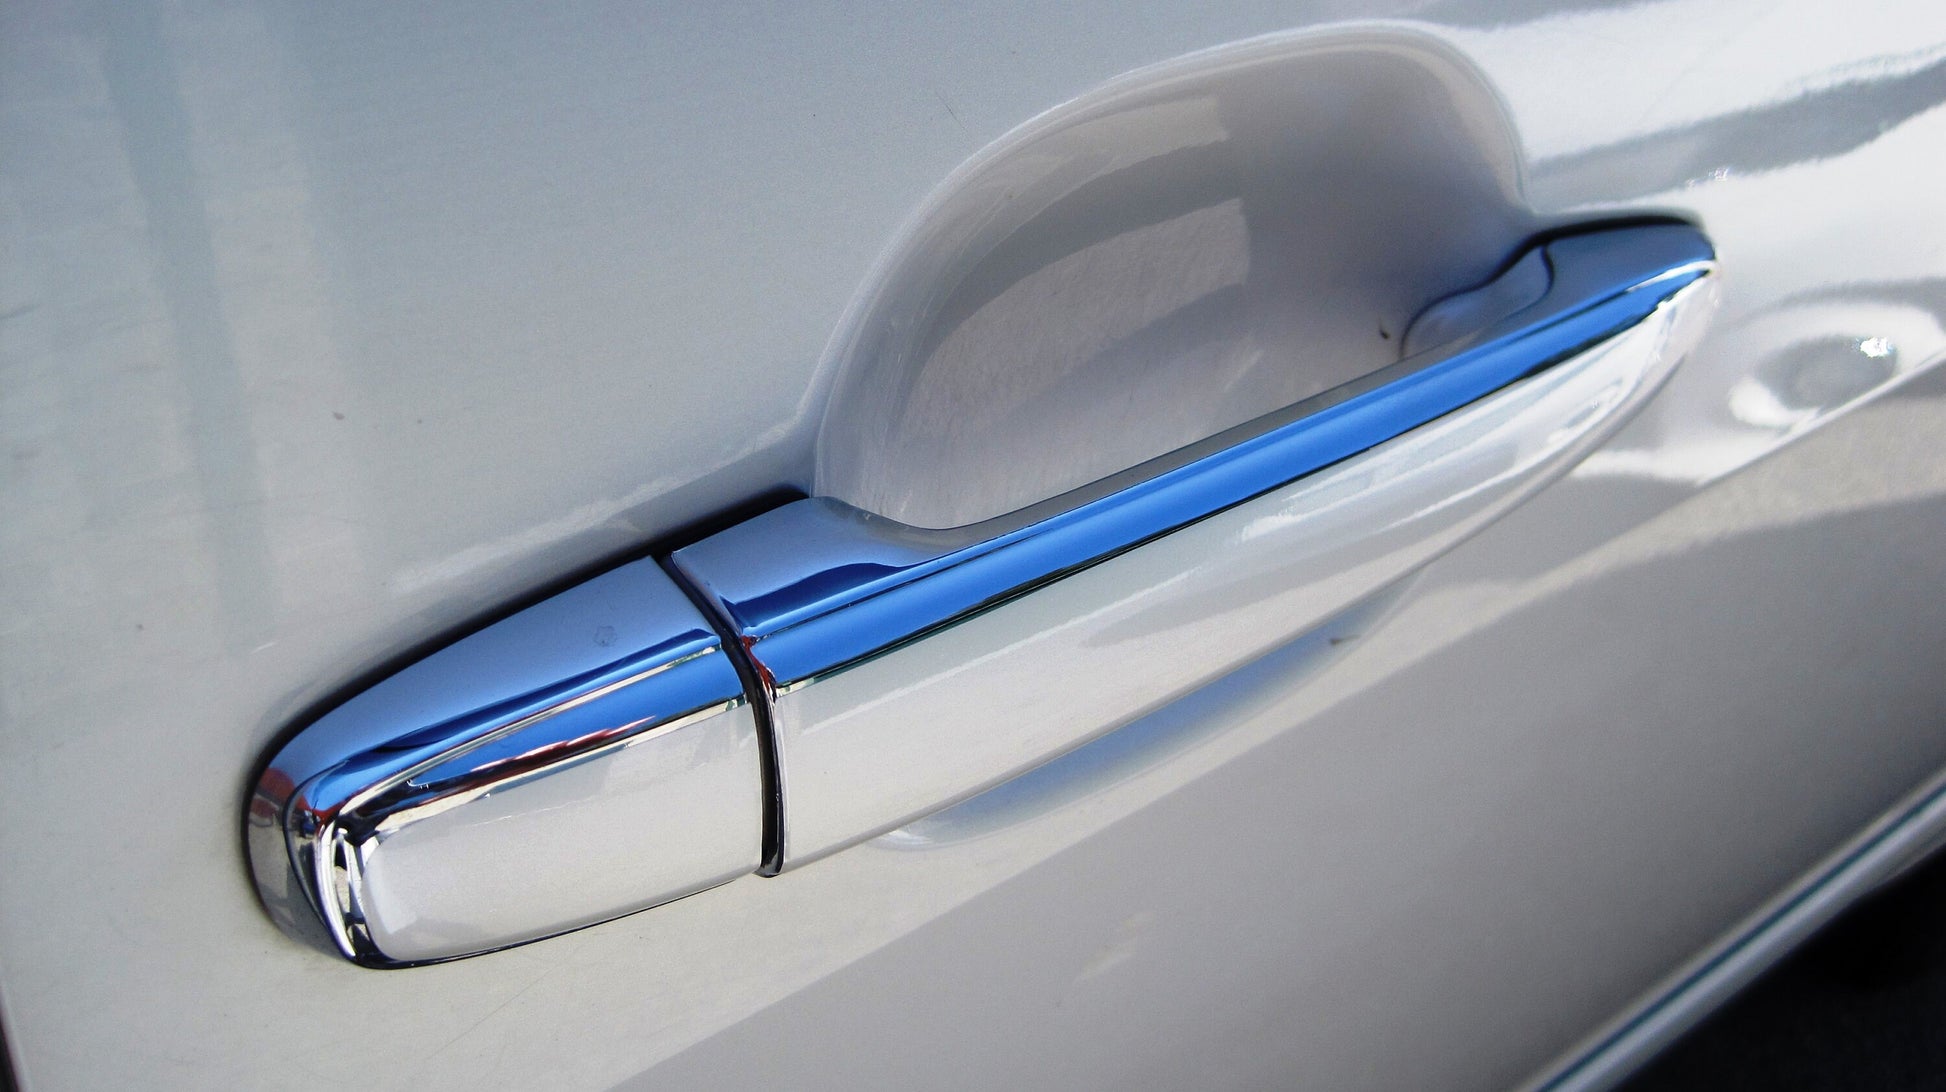 Full Set of Custom Black OR Chrome Door Handle Overlays / Covers For 2006 - 2011 Toyota Avalon - You Choose the Color of the Middle Insert